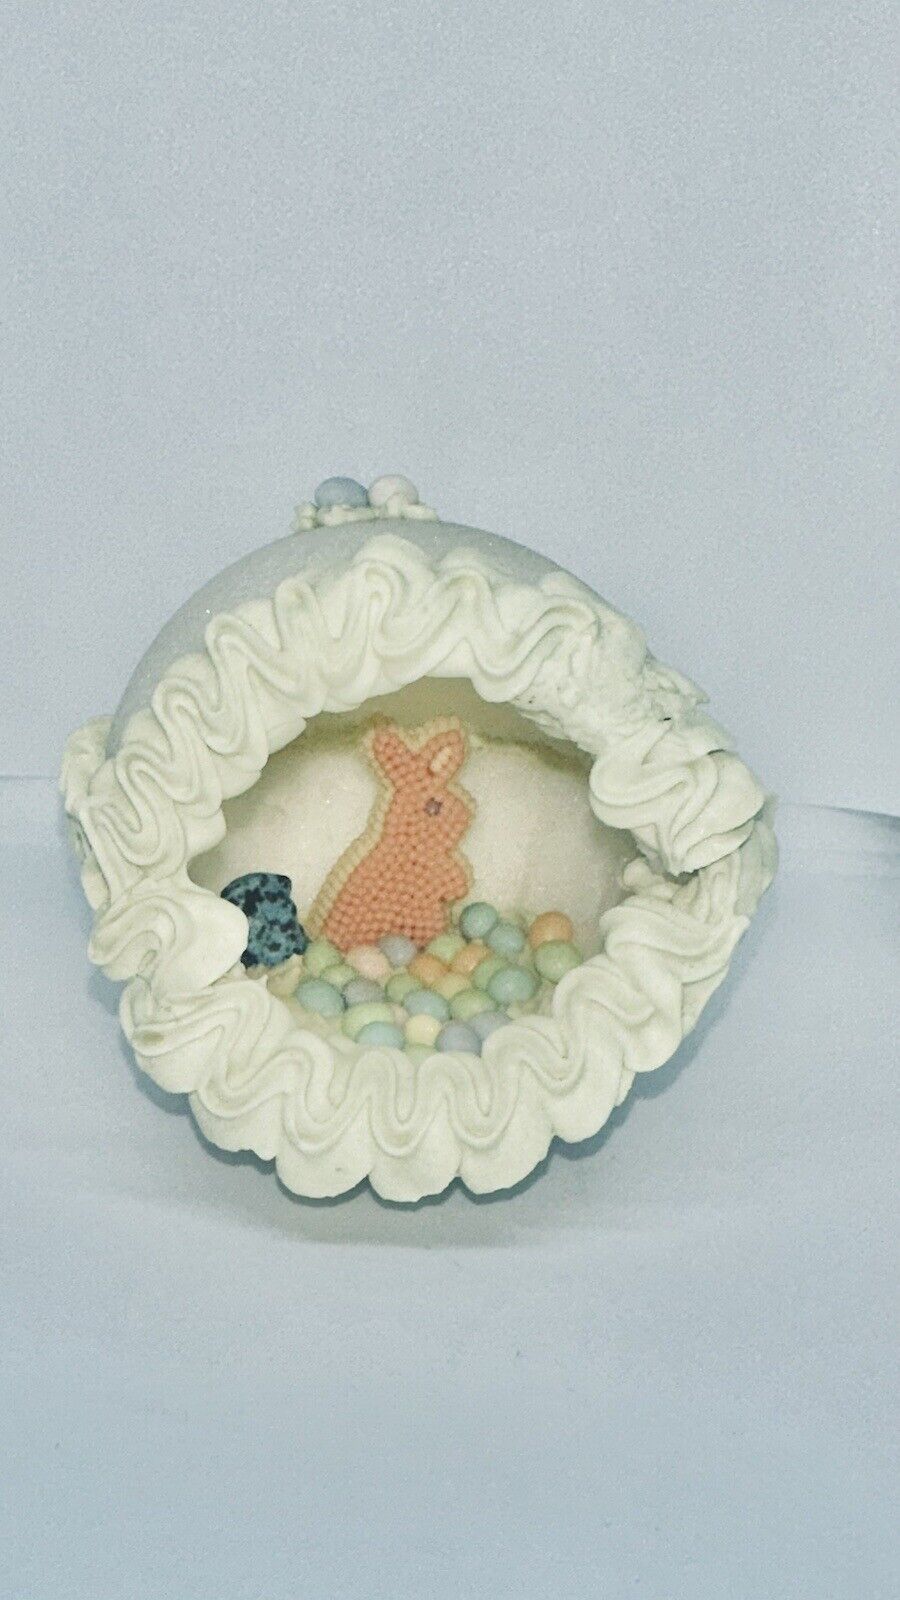 Handmade Vintage Candy Bunny Pastel “Eggs” Sugar Panorama Easter Egg Decoration